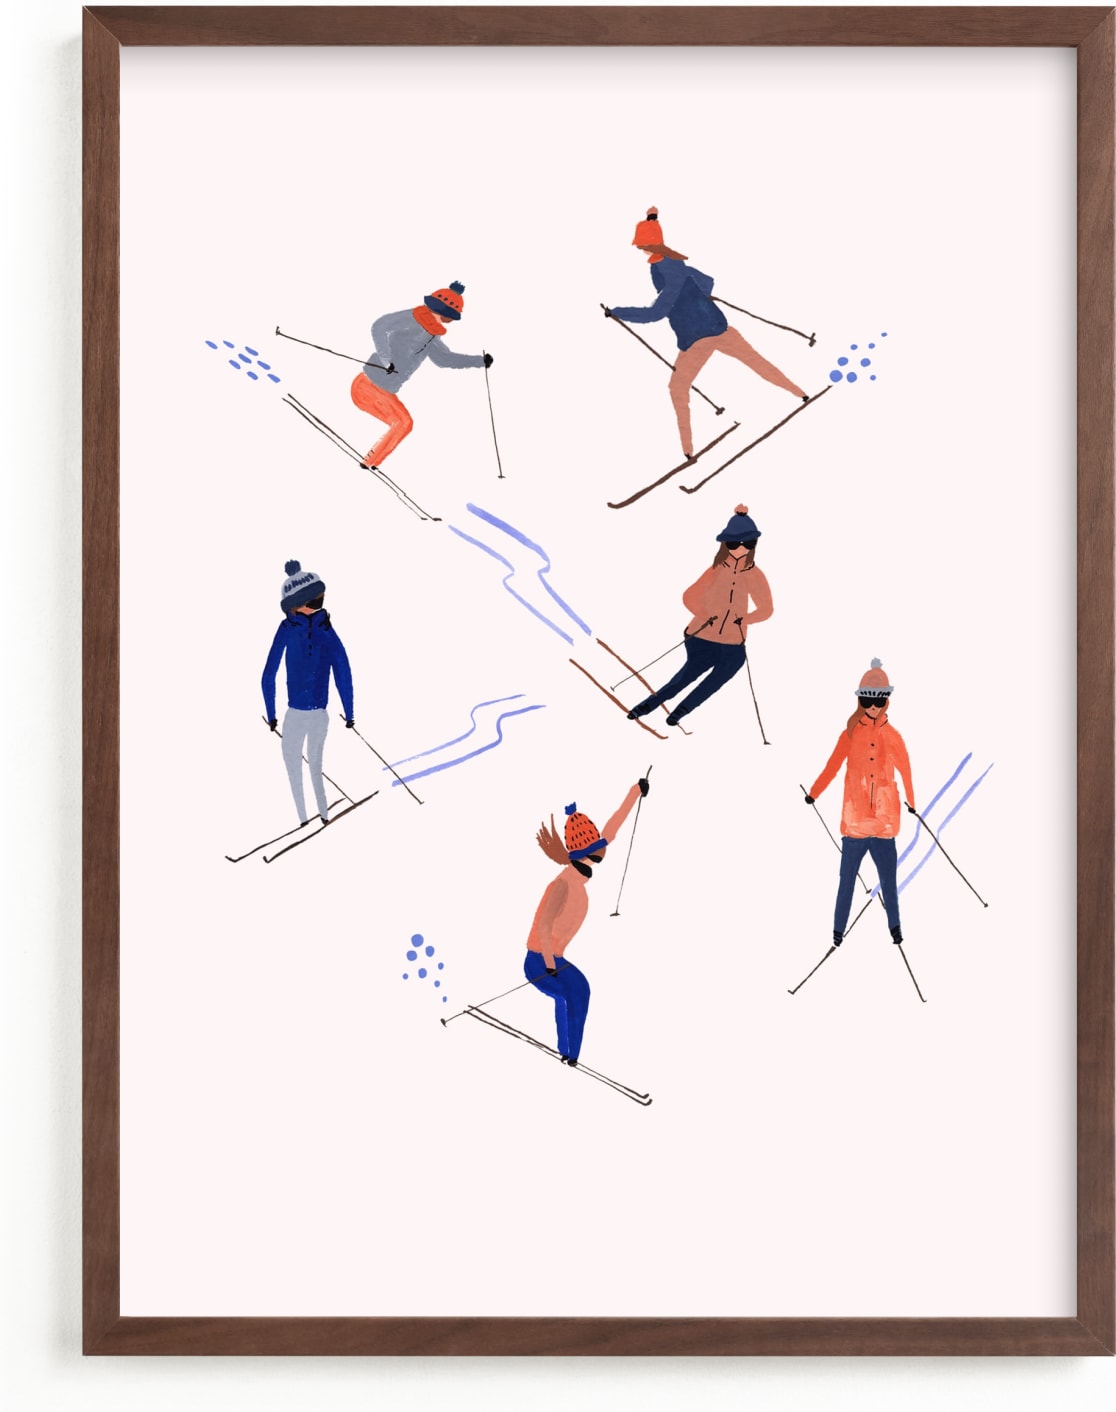 This is a orange kids wall art by Anee Shah called Ski people.